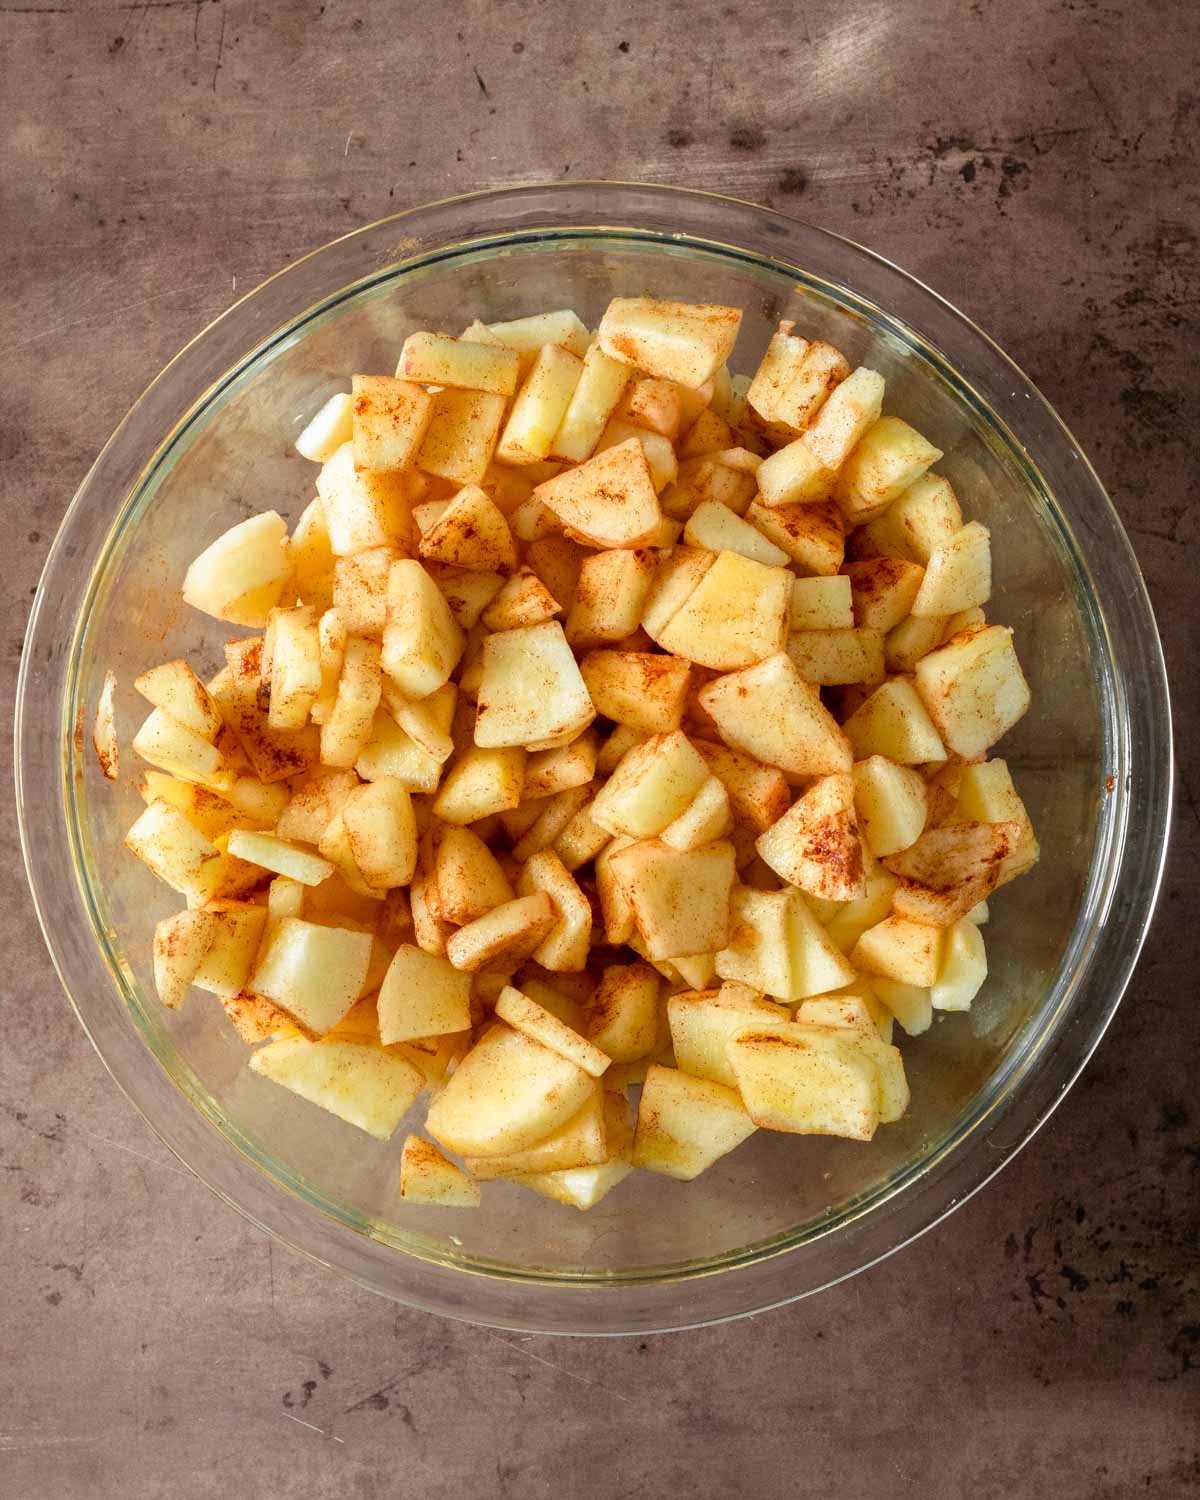 Step 1. Peel, core and slice the apples & mix with the water, maple syrup and cinnamon to the bowl